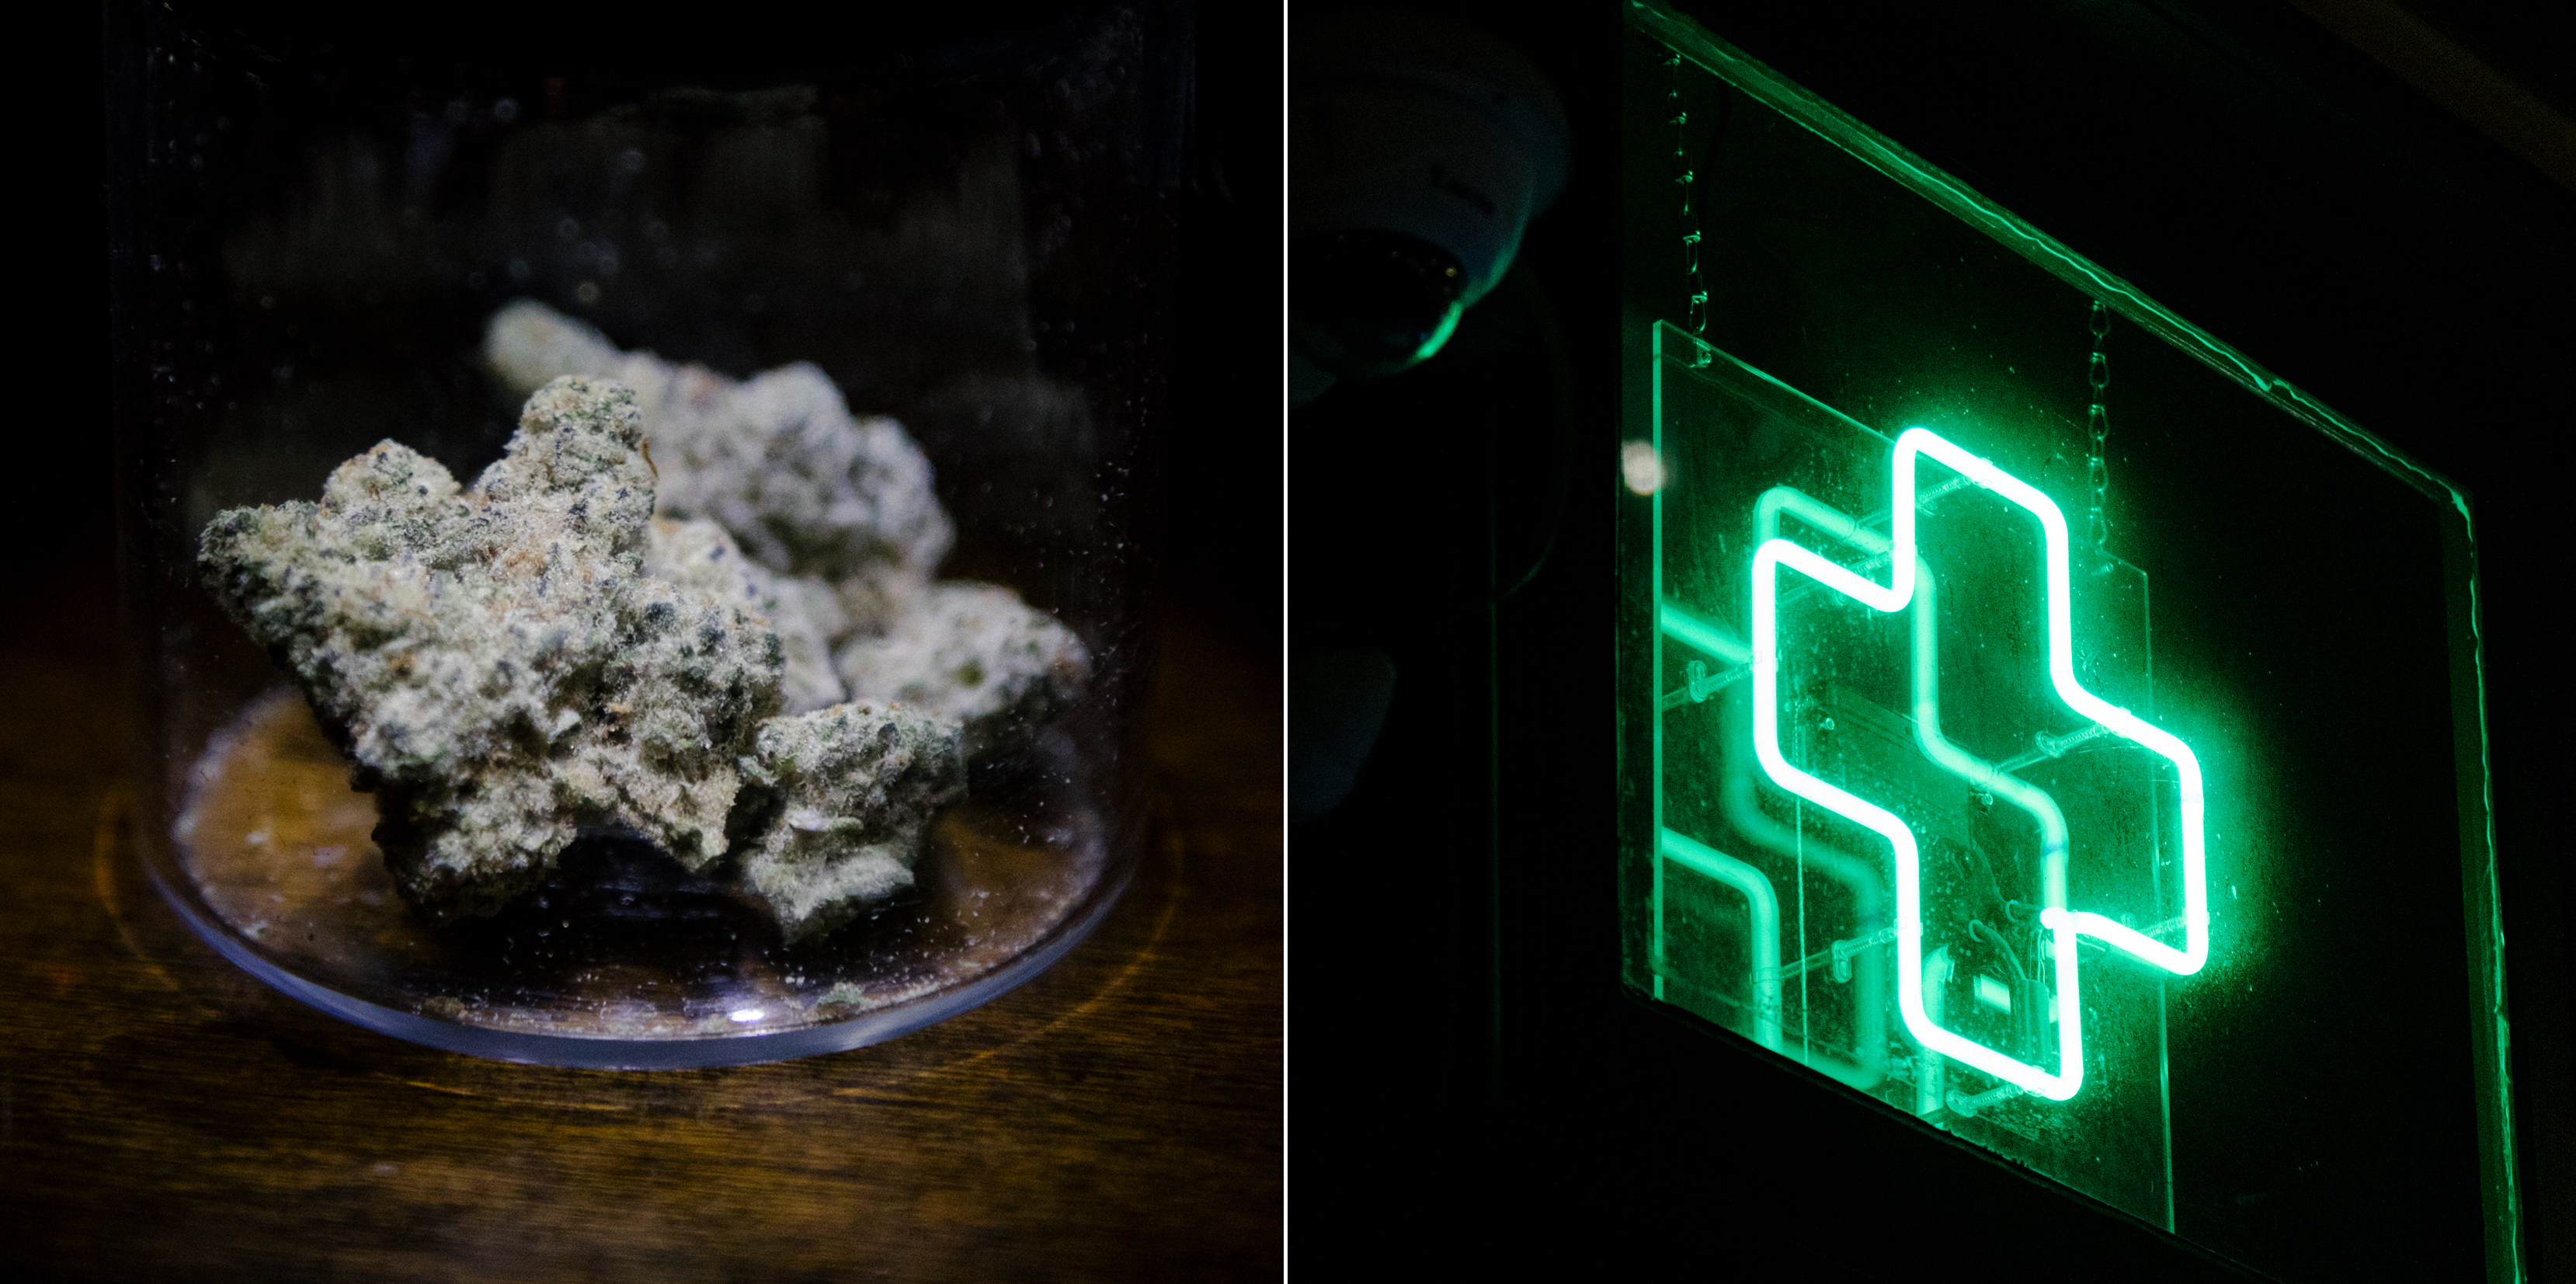 Two images side by side of a cannabis bud and a green neon cross set again black backdrops.